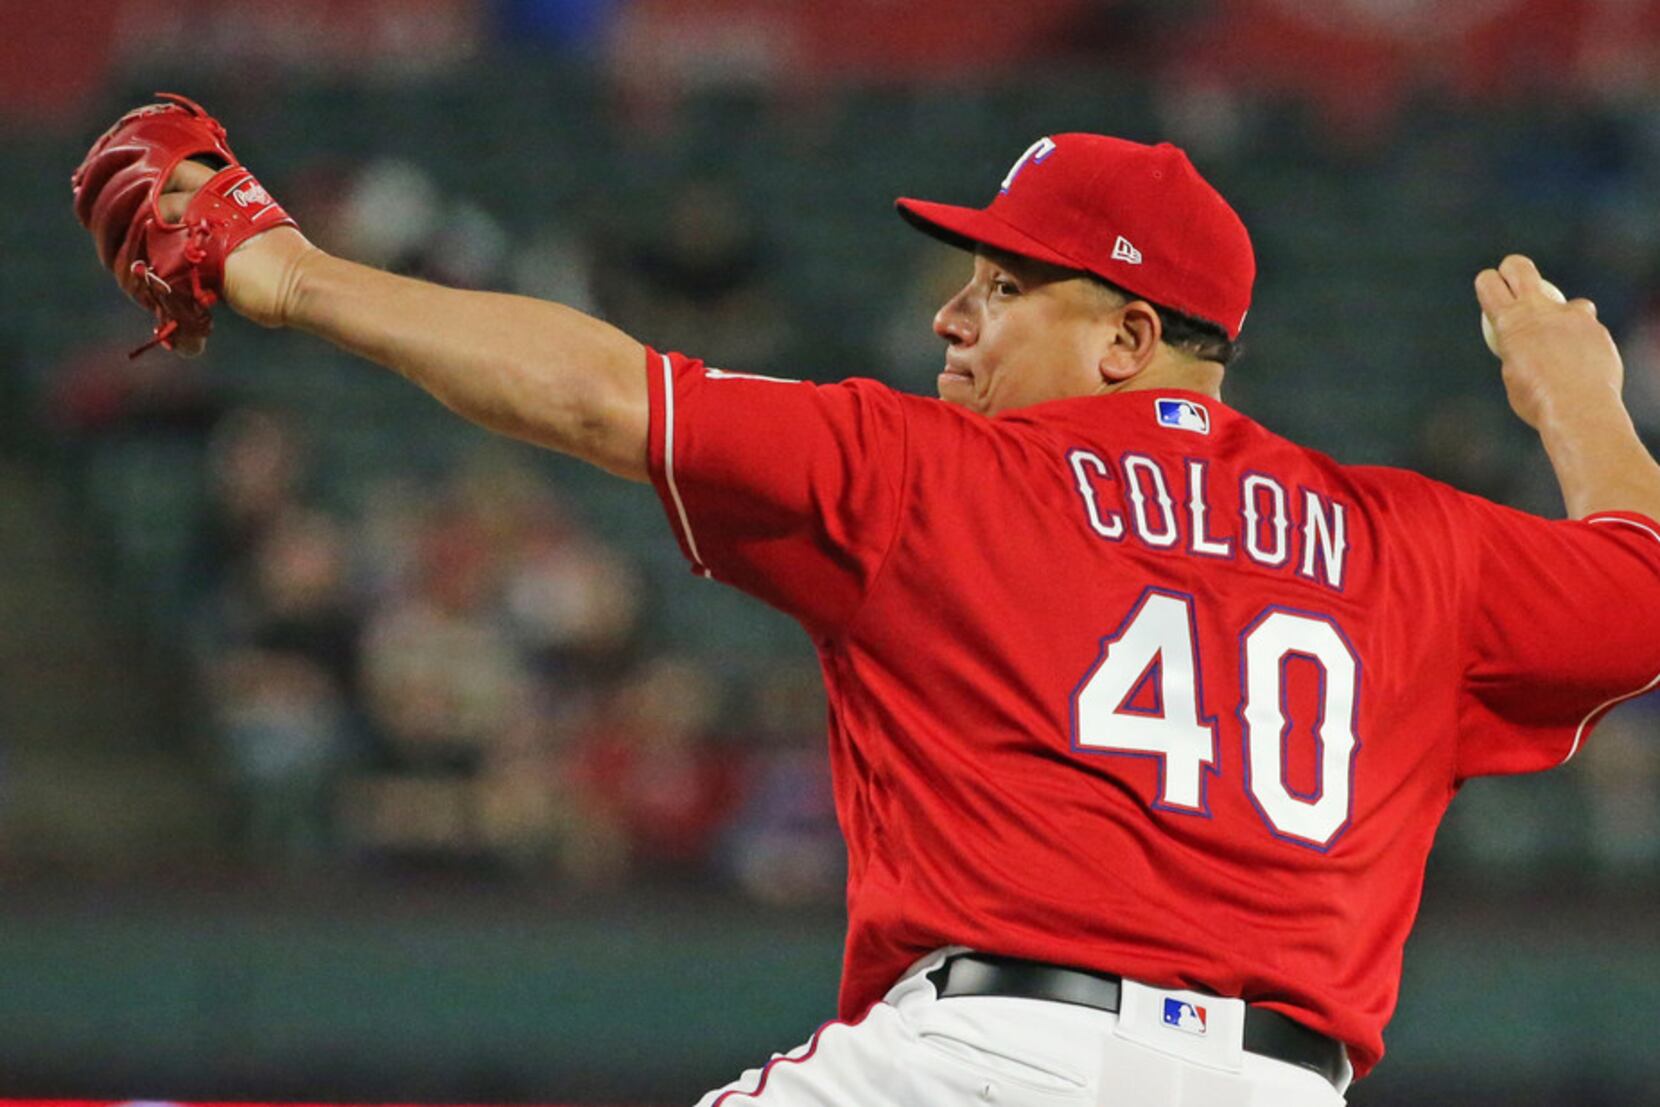 Fun fact: Mets' Bartolo Colon is now the last former Expos player in MLB 